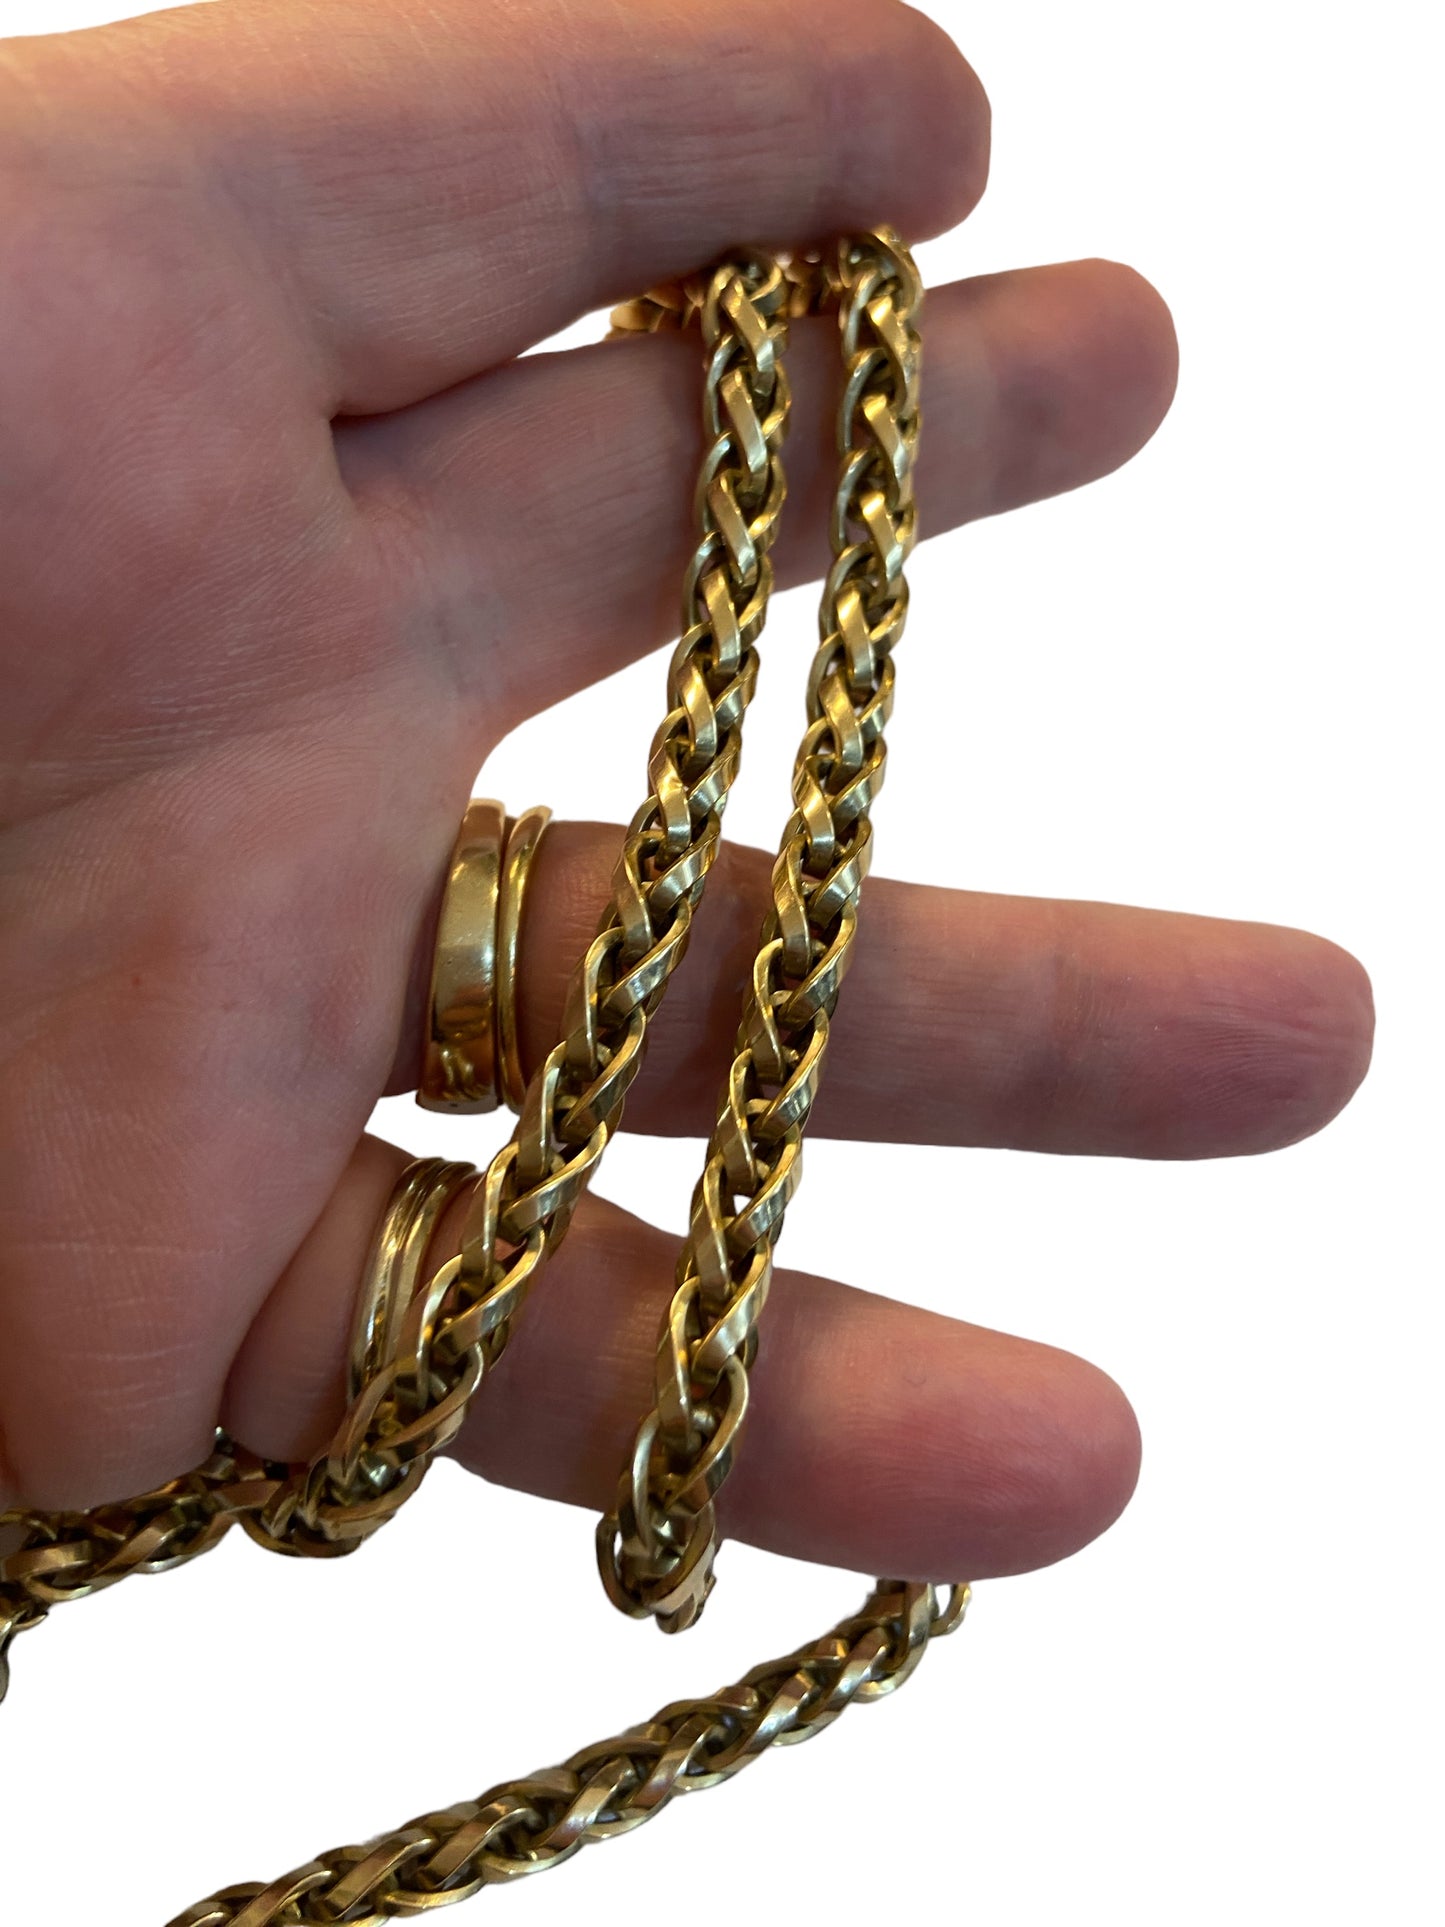 9ct chunky vintage braid link chain 18 inches